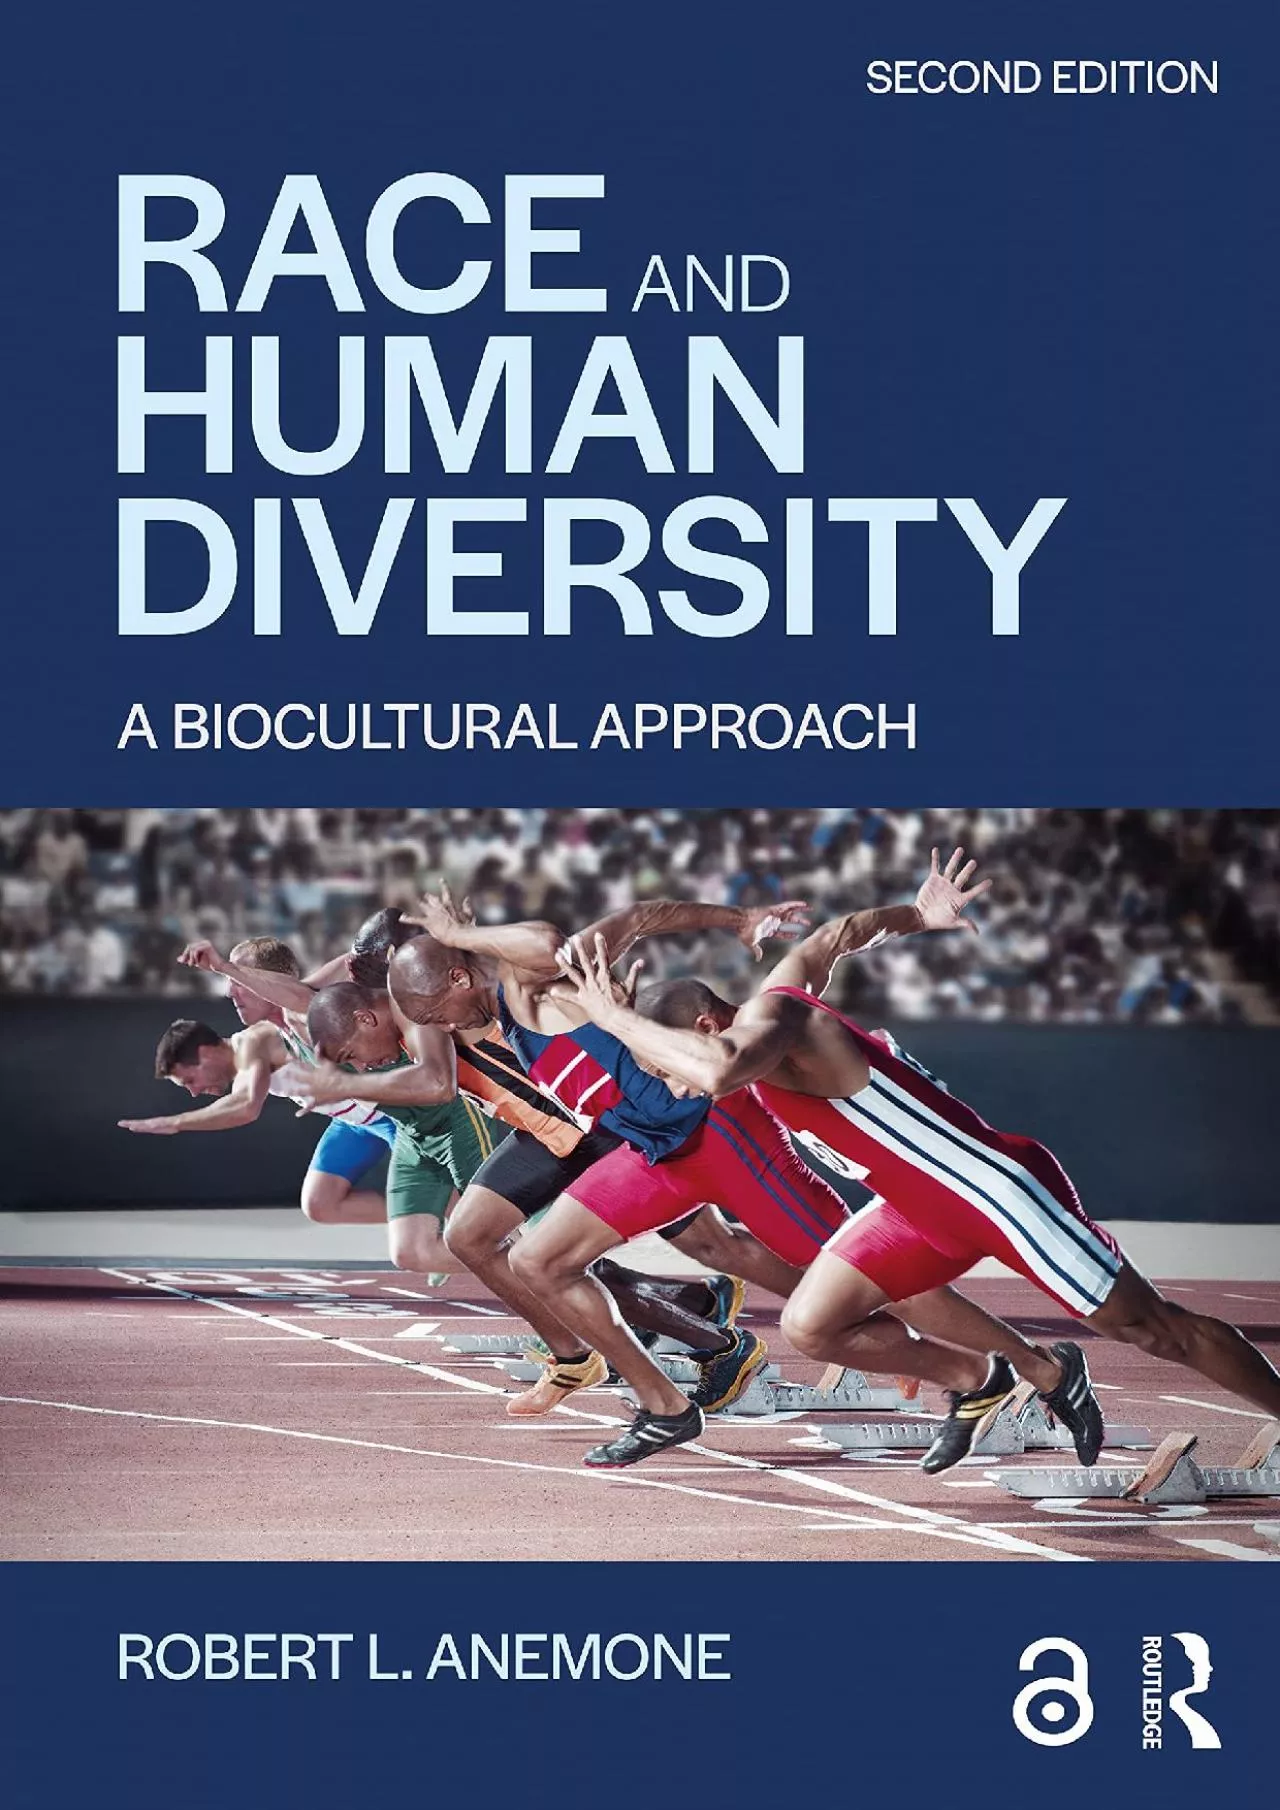 (EBOOK)-Race and Human Diversity: A Biocultural Approach